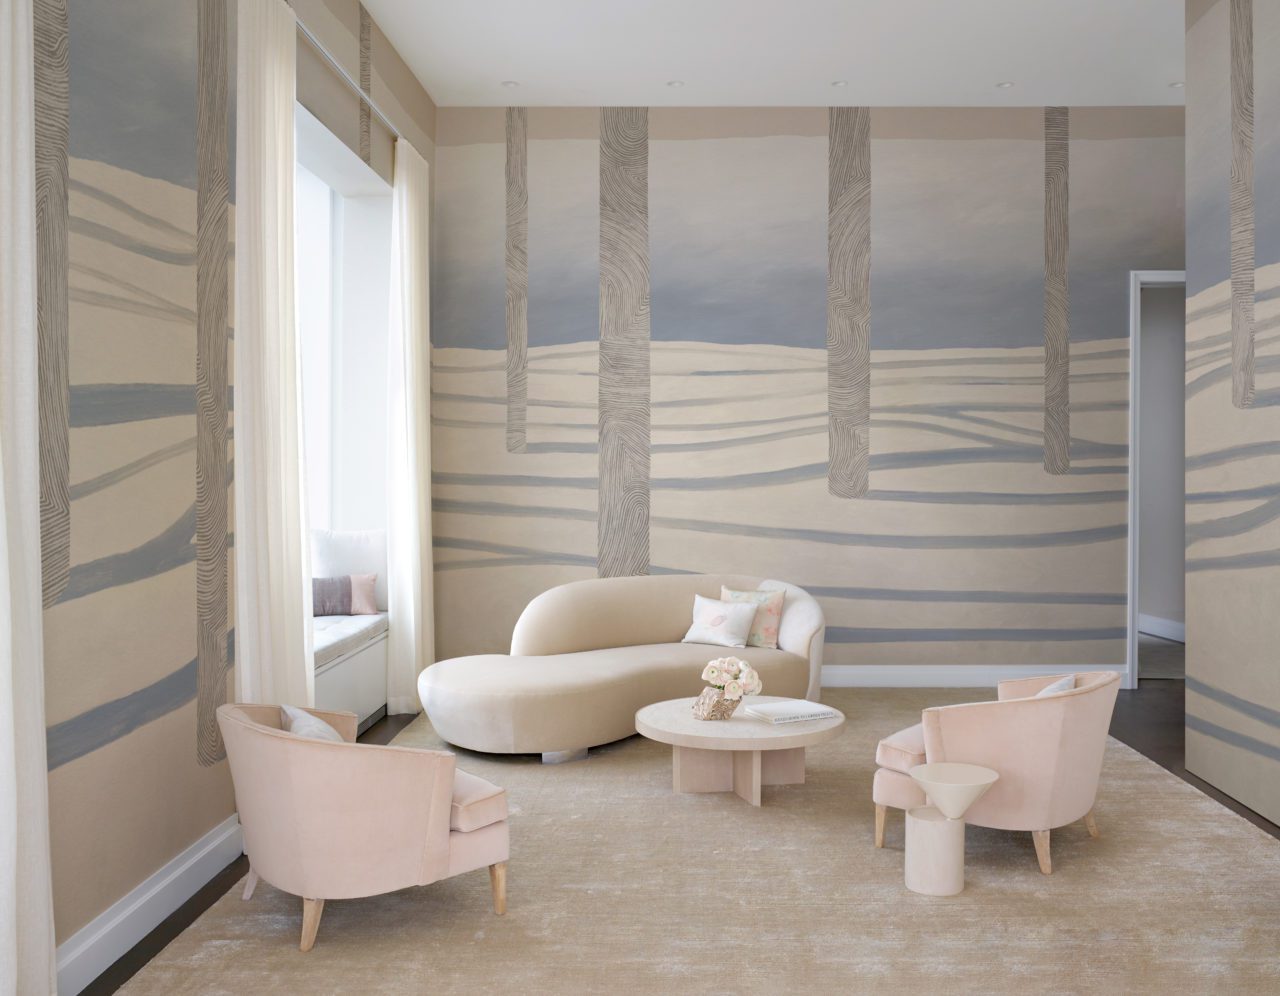 Calico Wallpaper Introduces Atmosphere Collection